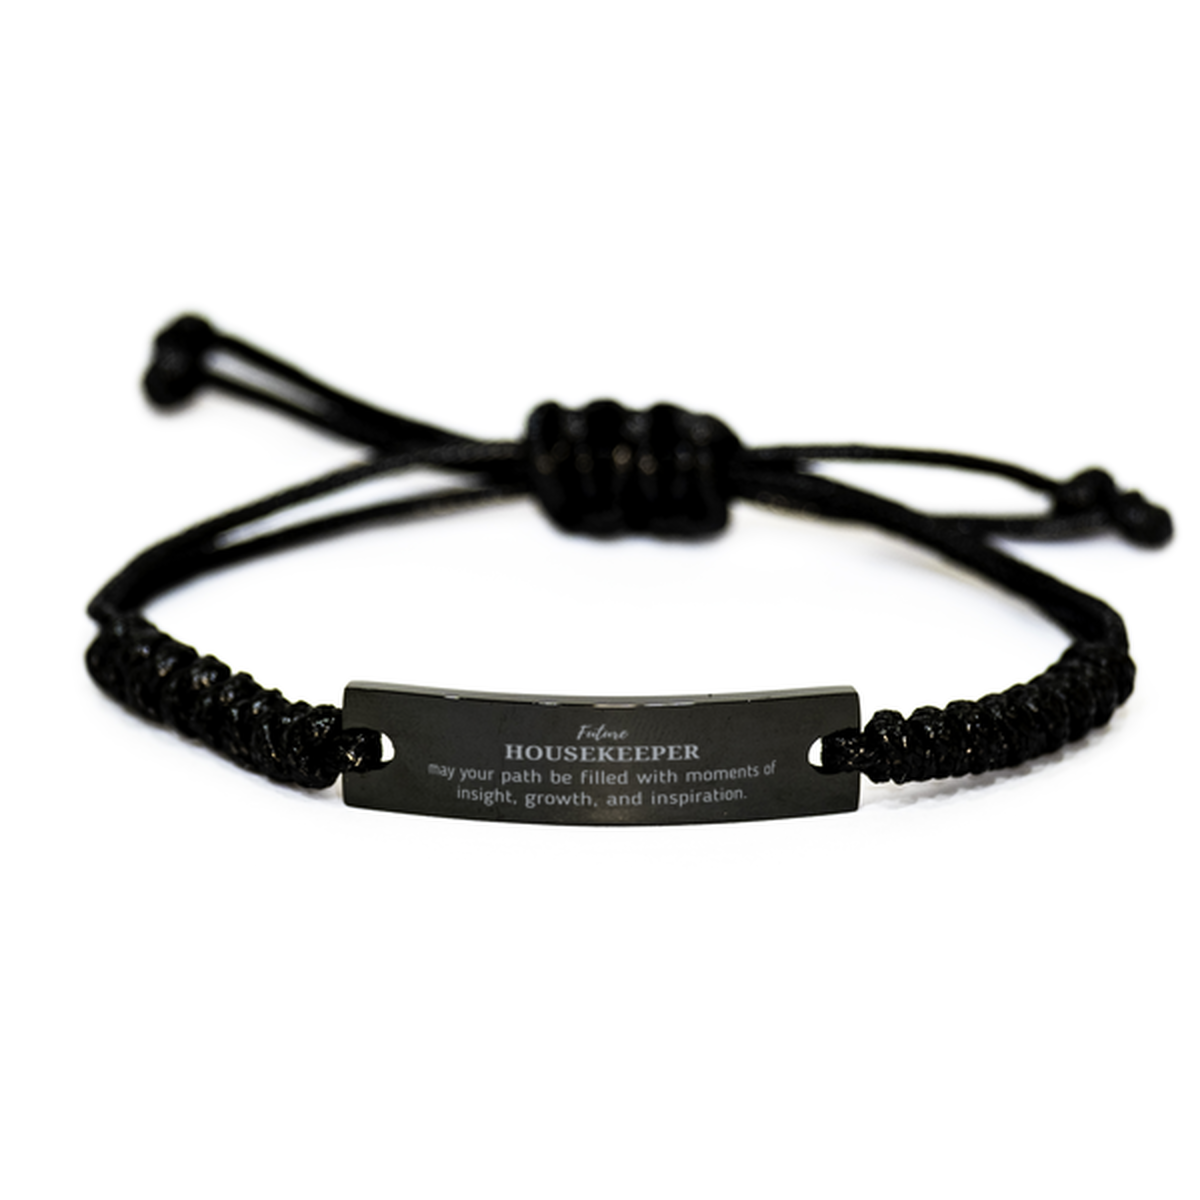 Future Housekeeper Gifts, May your path be filled with moments of insight, Graduation Gifts for New Housekeeper, Christmas Unique Black Rope Bracelet For Men, Women, Friends